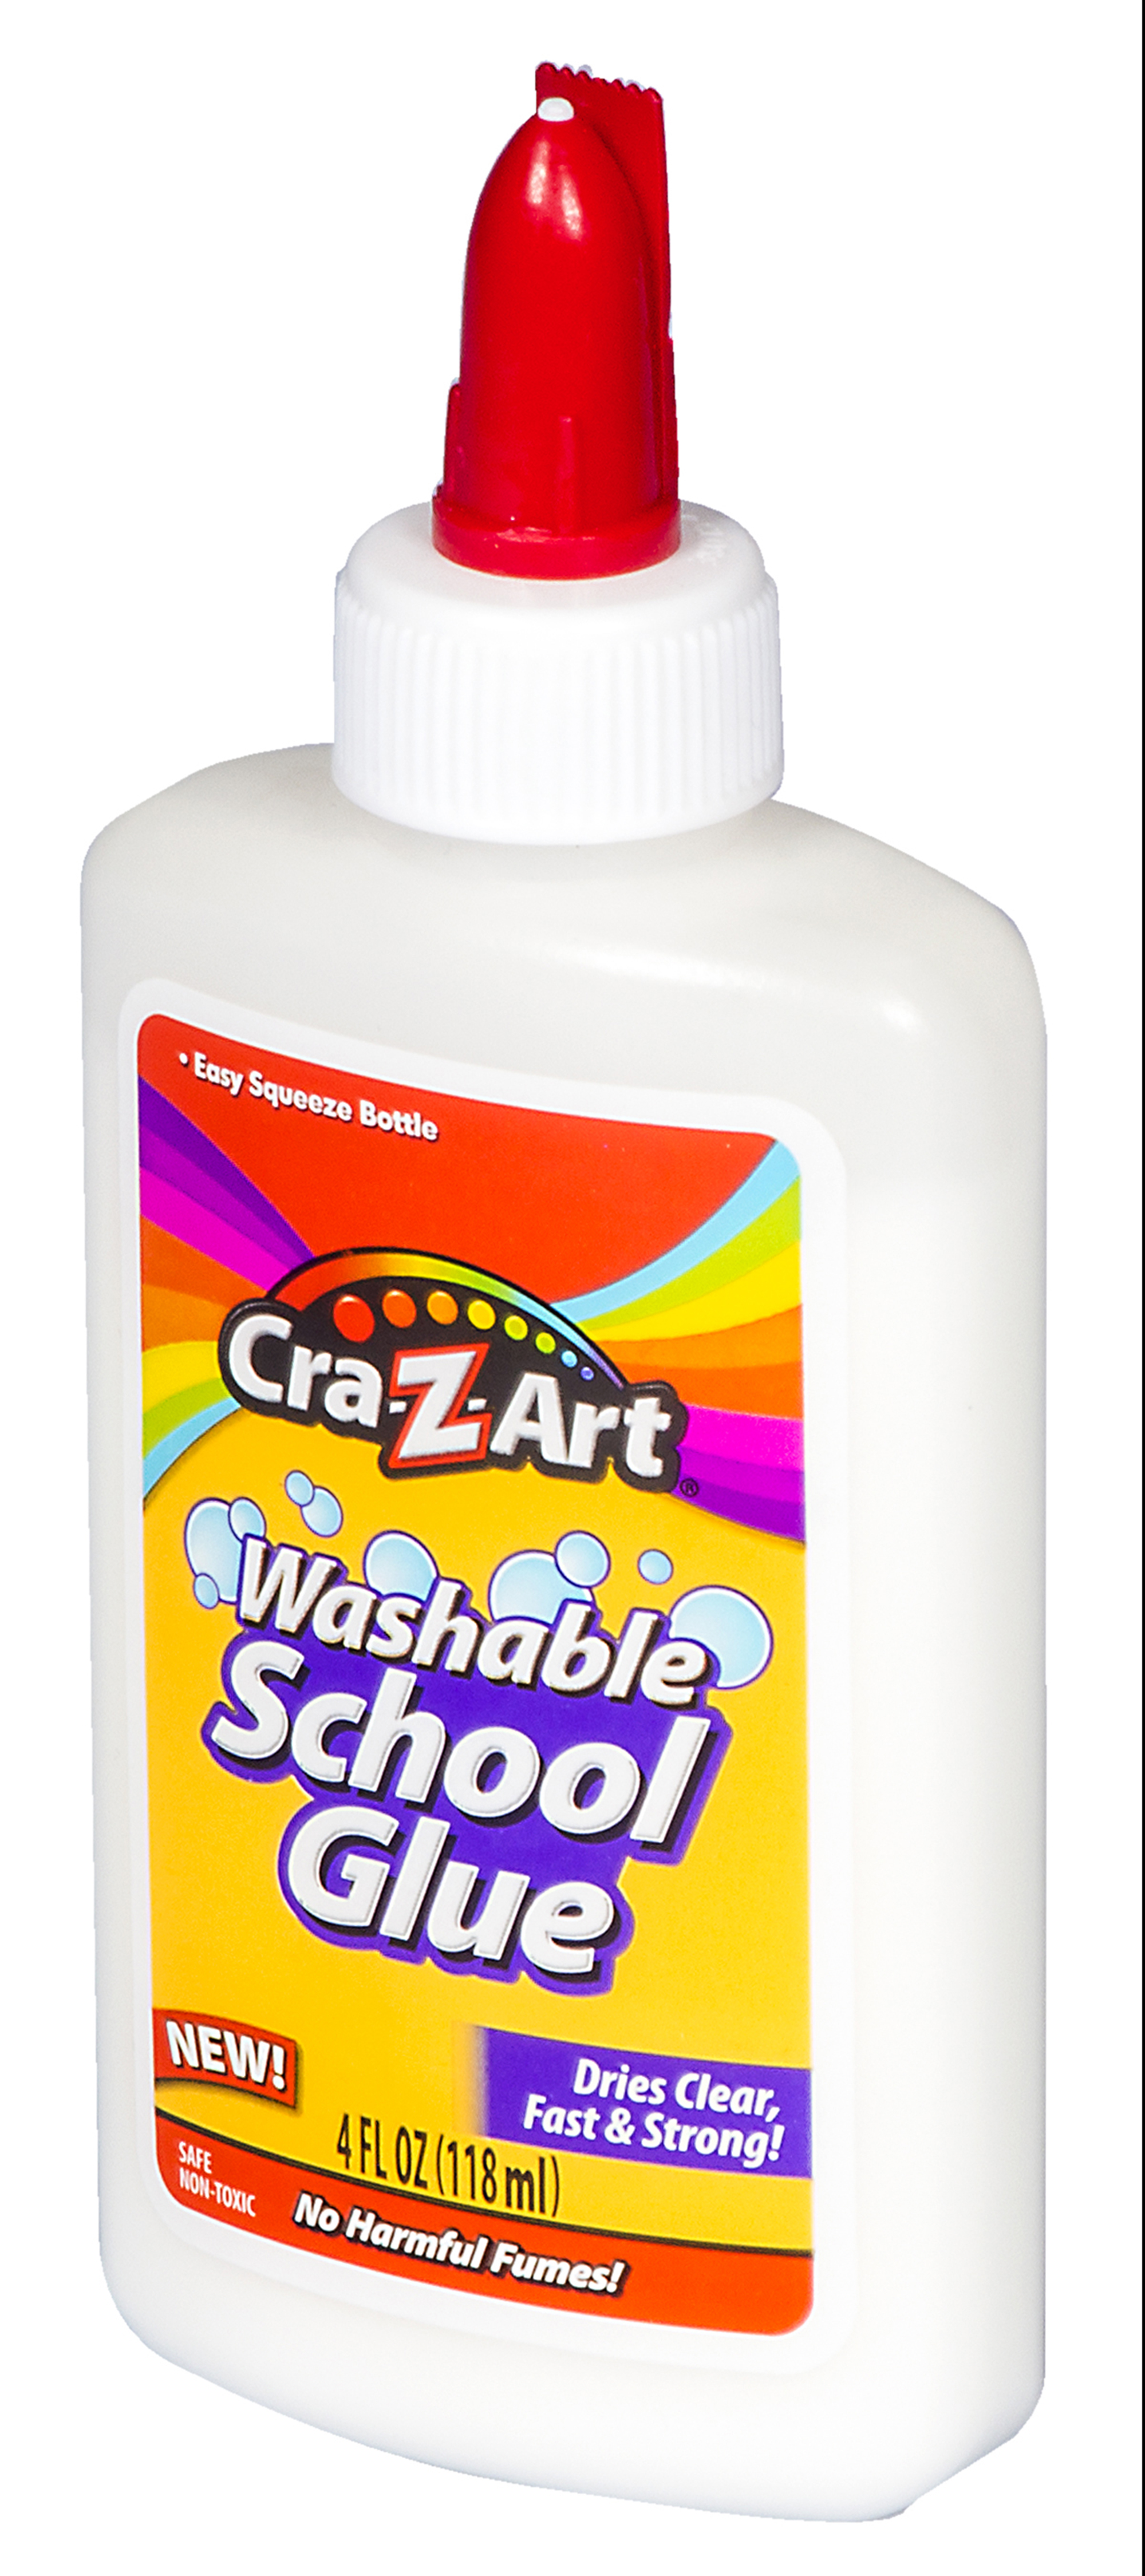 Cra-Z-Art Washable School Glue, 4oz White, Assembled Product Weight 0.4lb - image 4 of 9